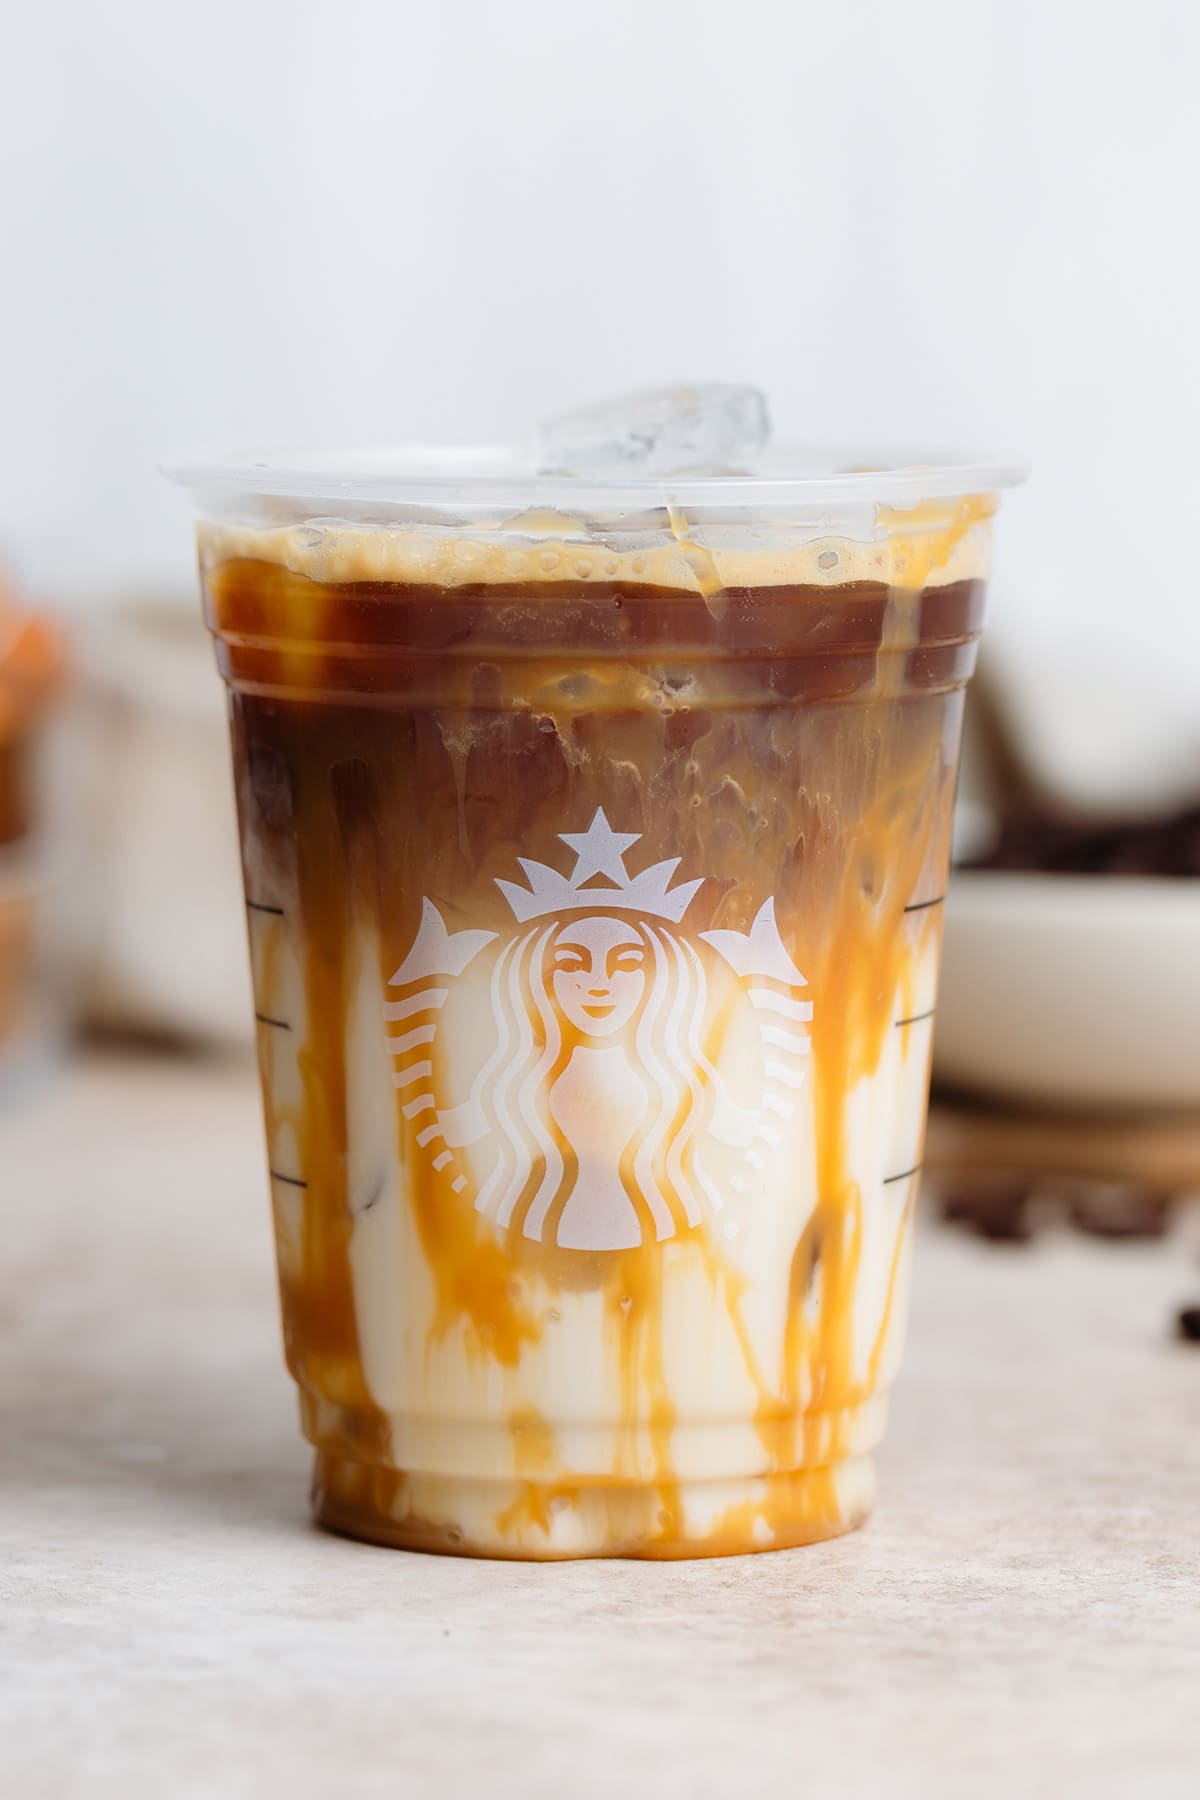 Iced caramel macchiato in a plastic Starbucks cup on a beige background.